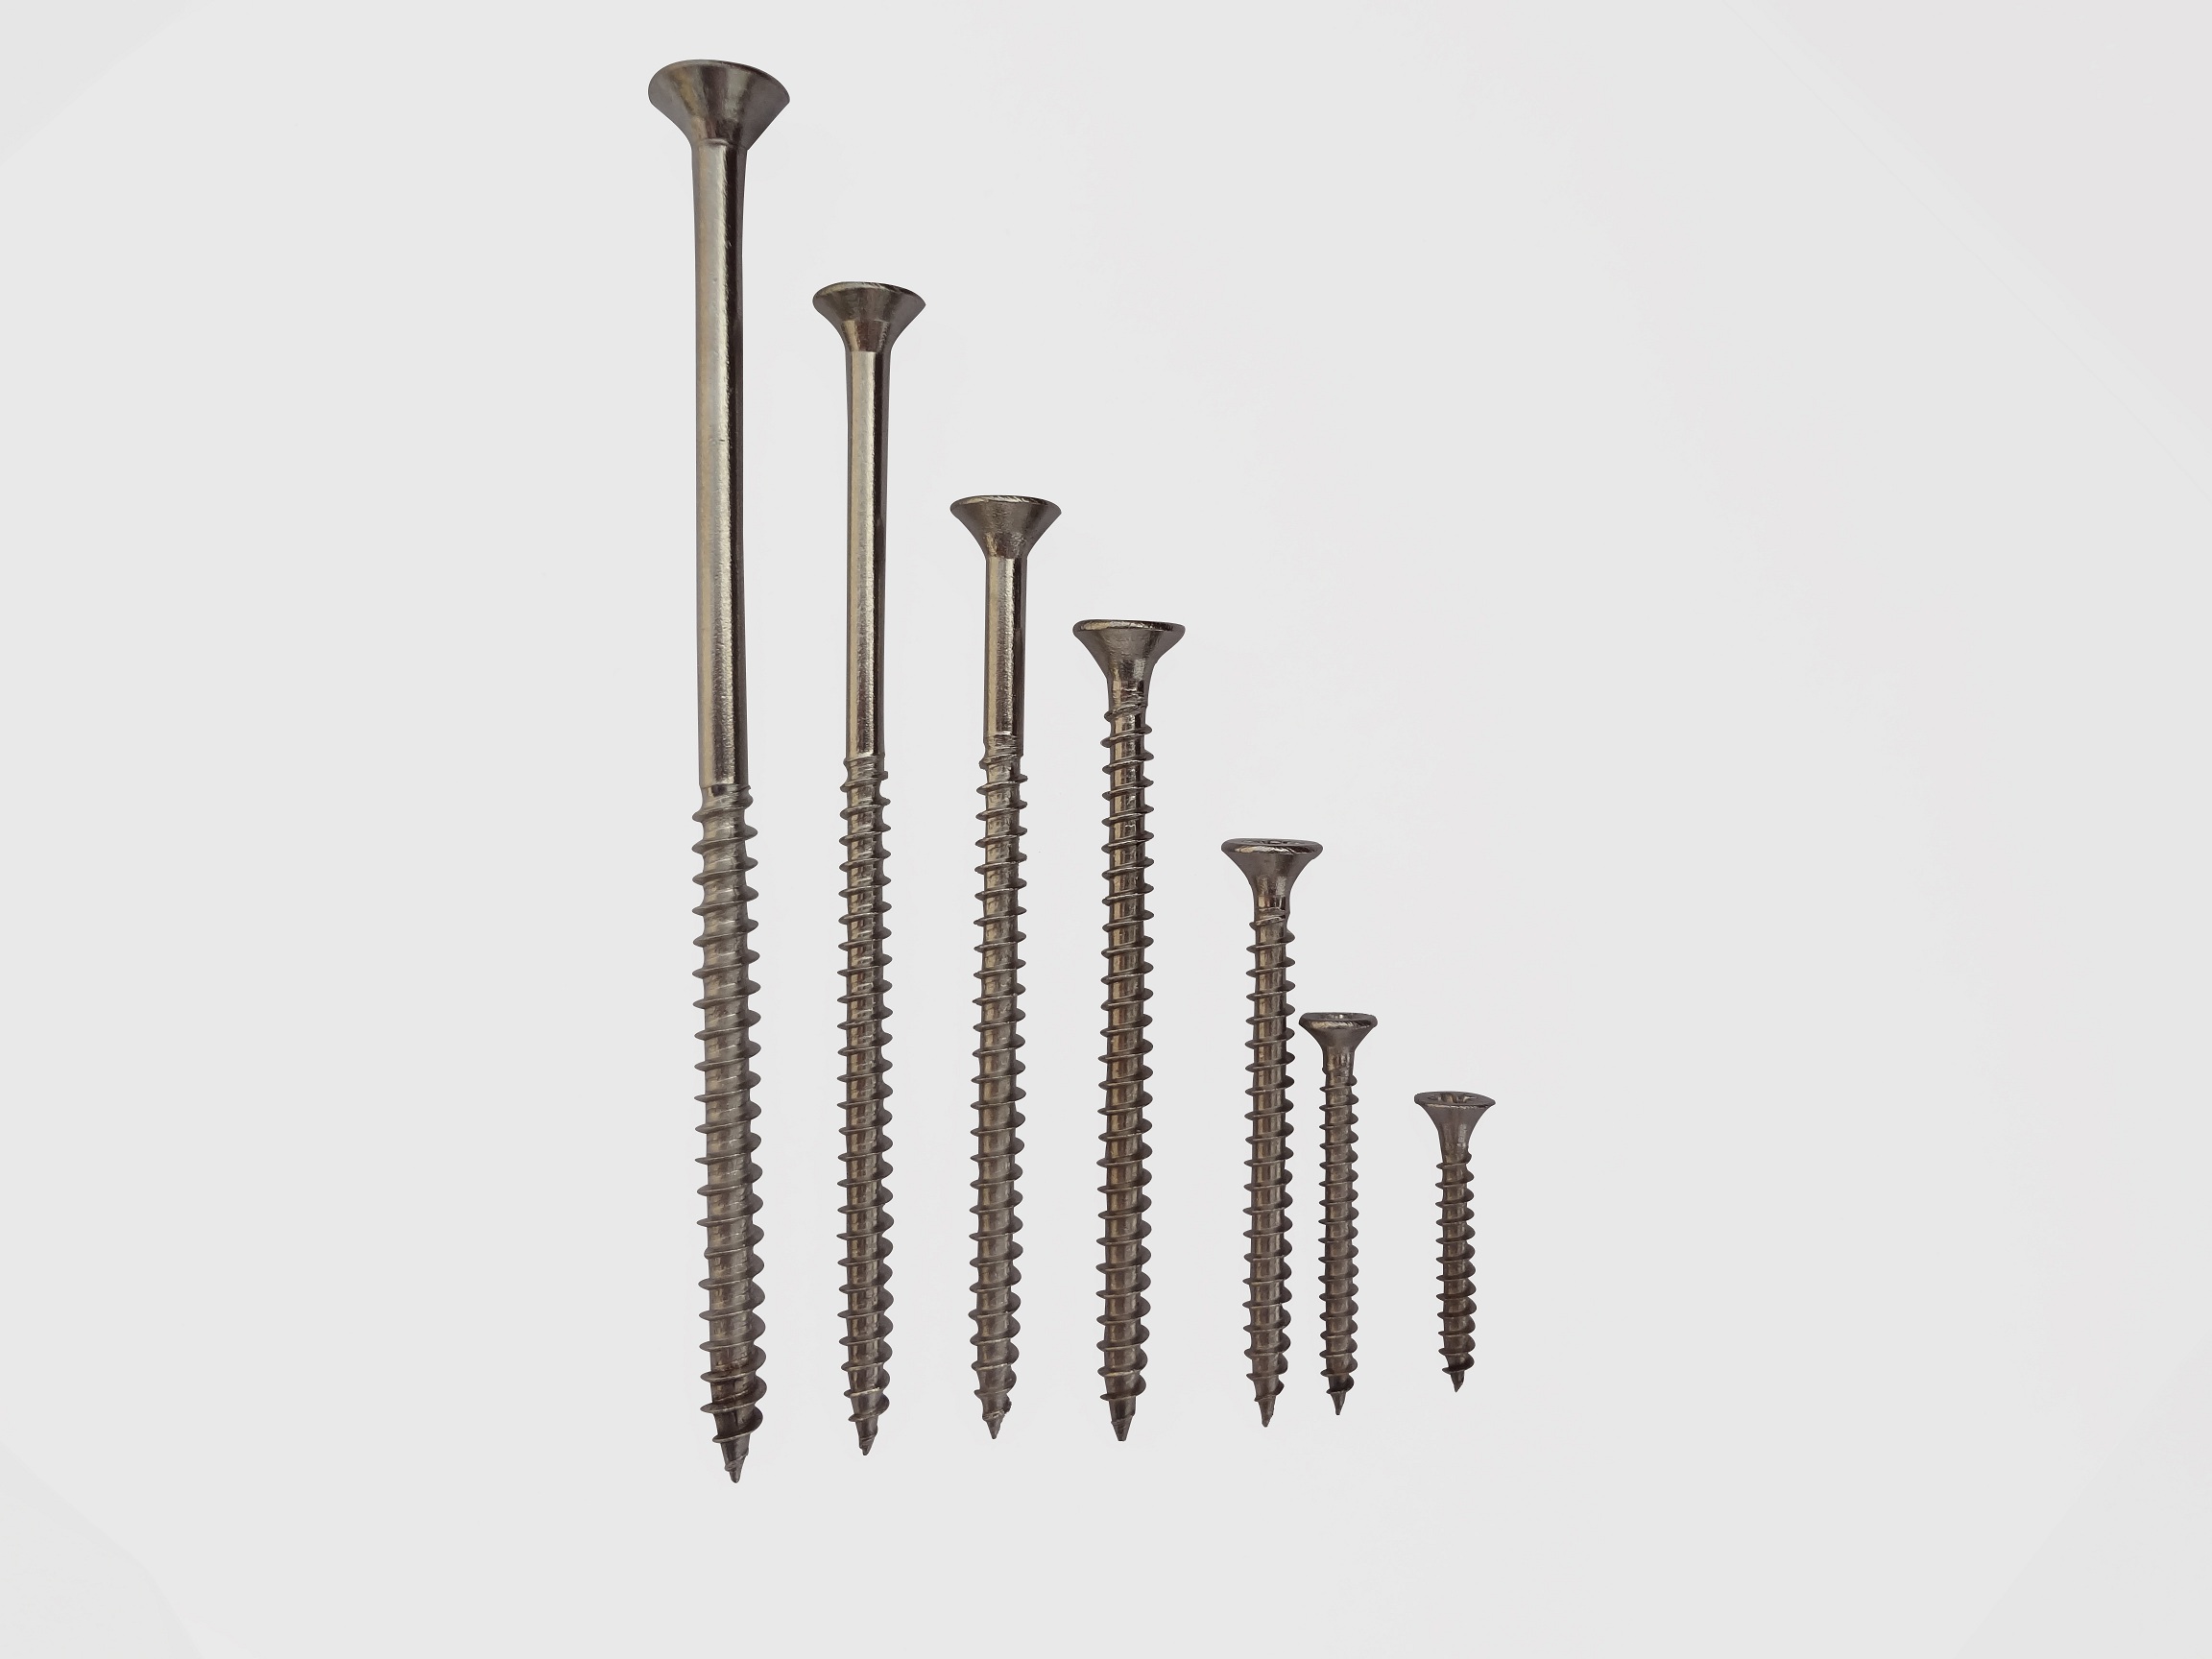 Double Csk Head Pozi Chipboard Flooring Screws For Squeaky